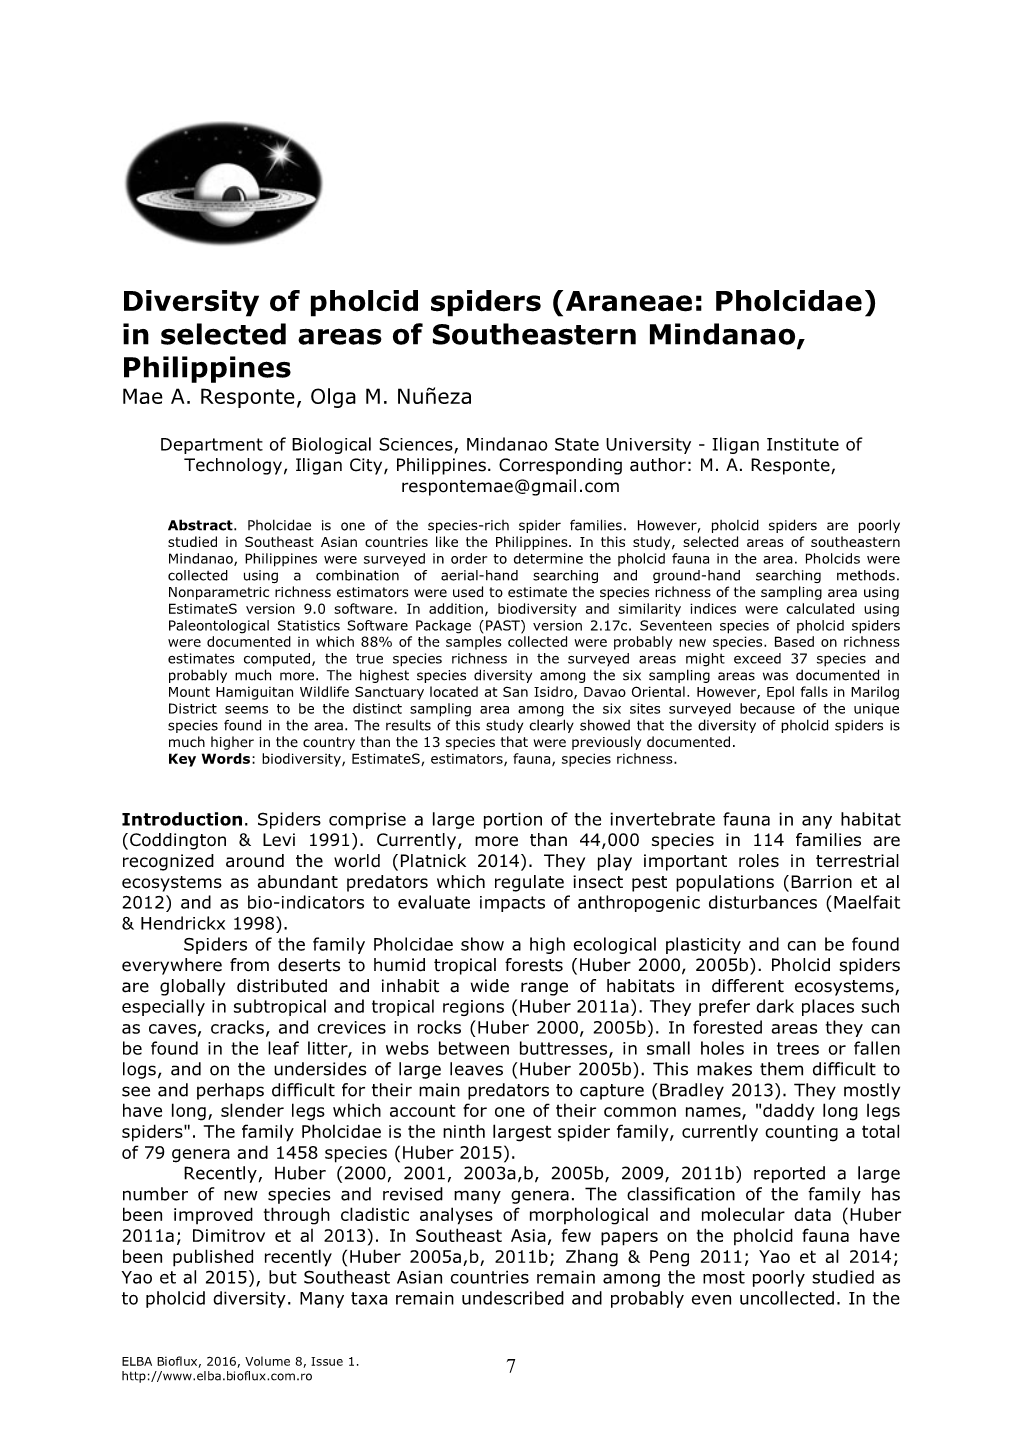 Diversity of Pholcid Spiders (Araneae: Pholcidae) in Selected Areas of Southeastern Mindanao, Philippines Mae A